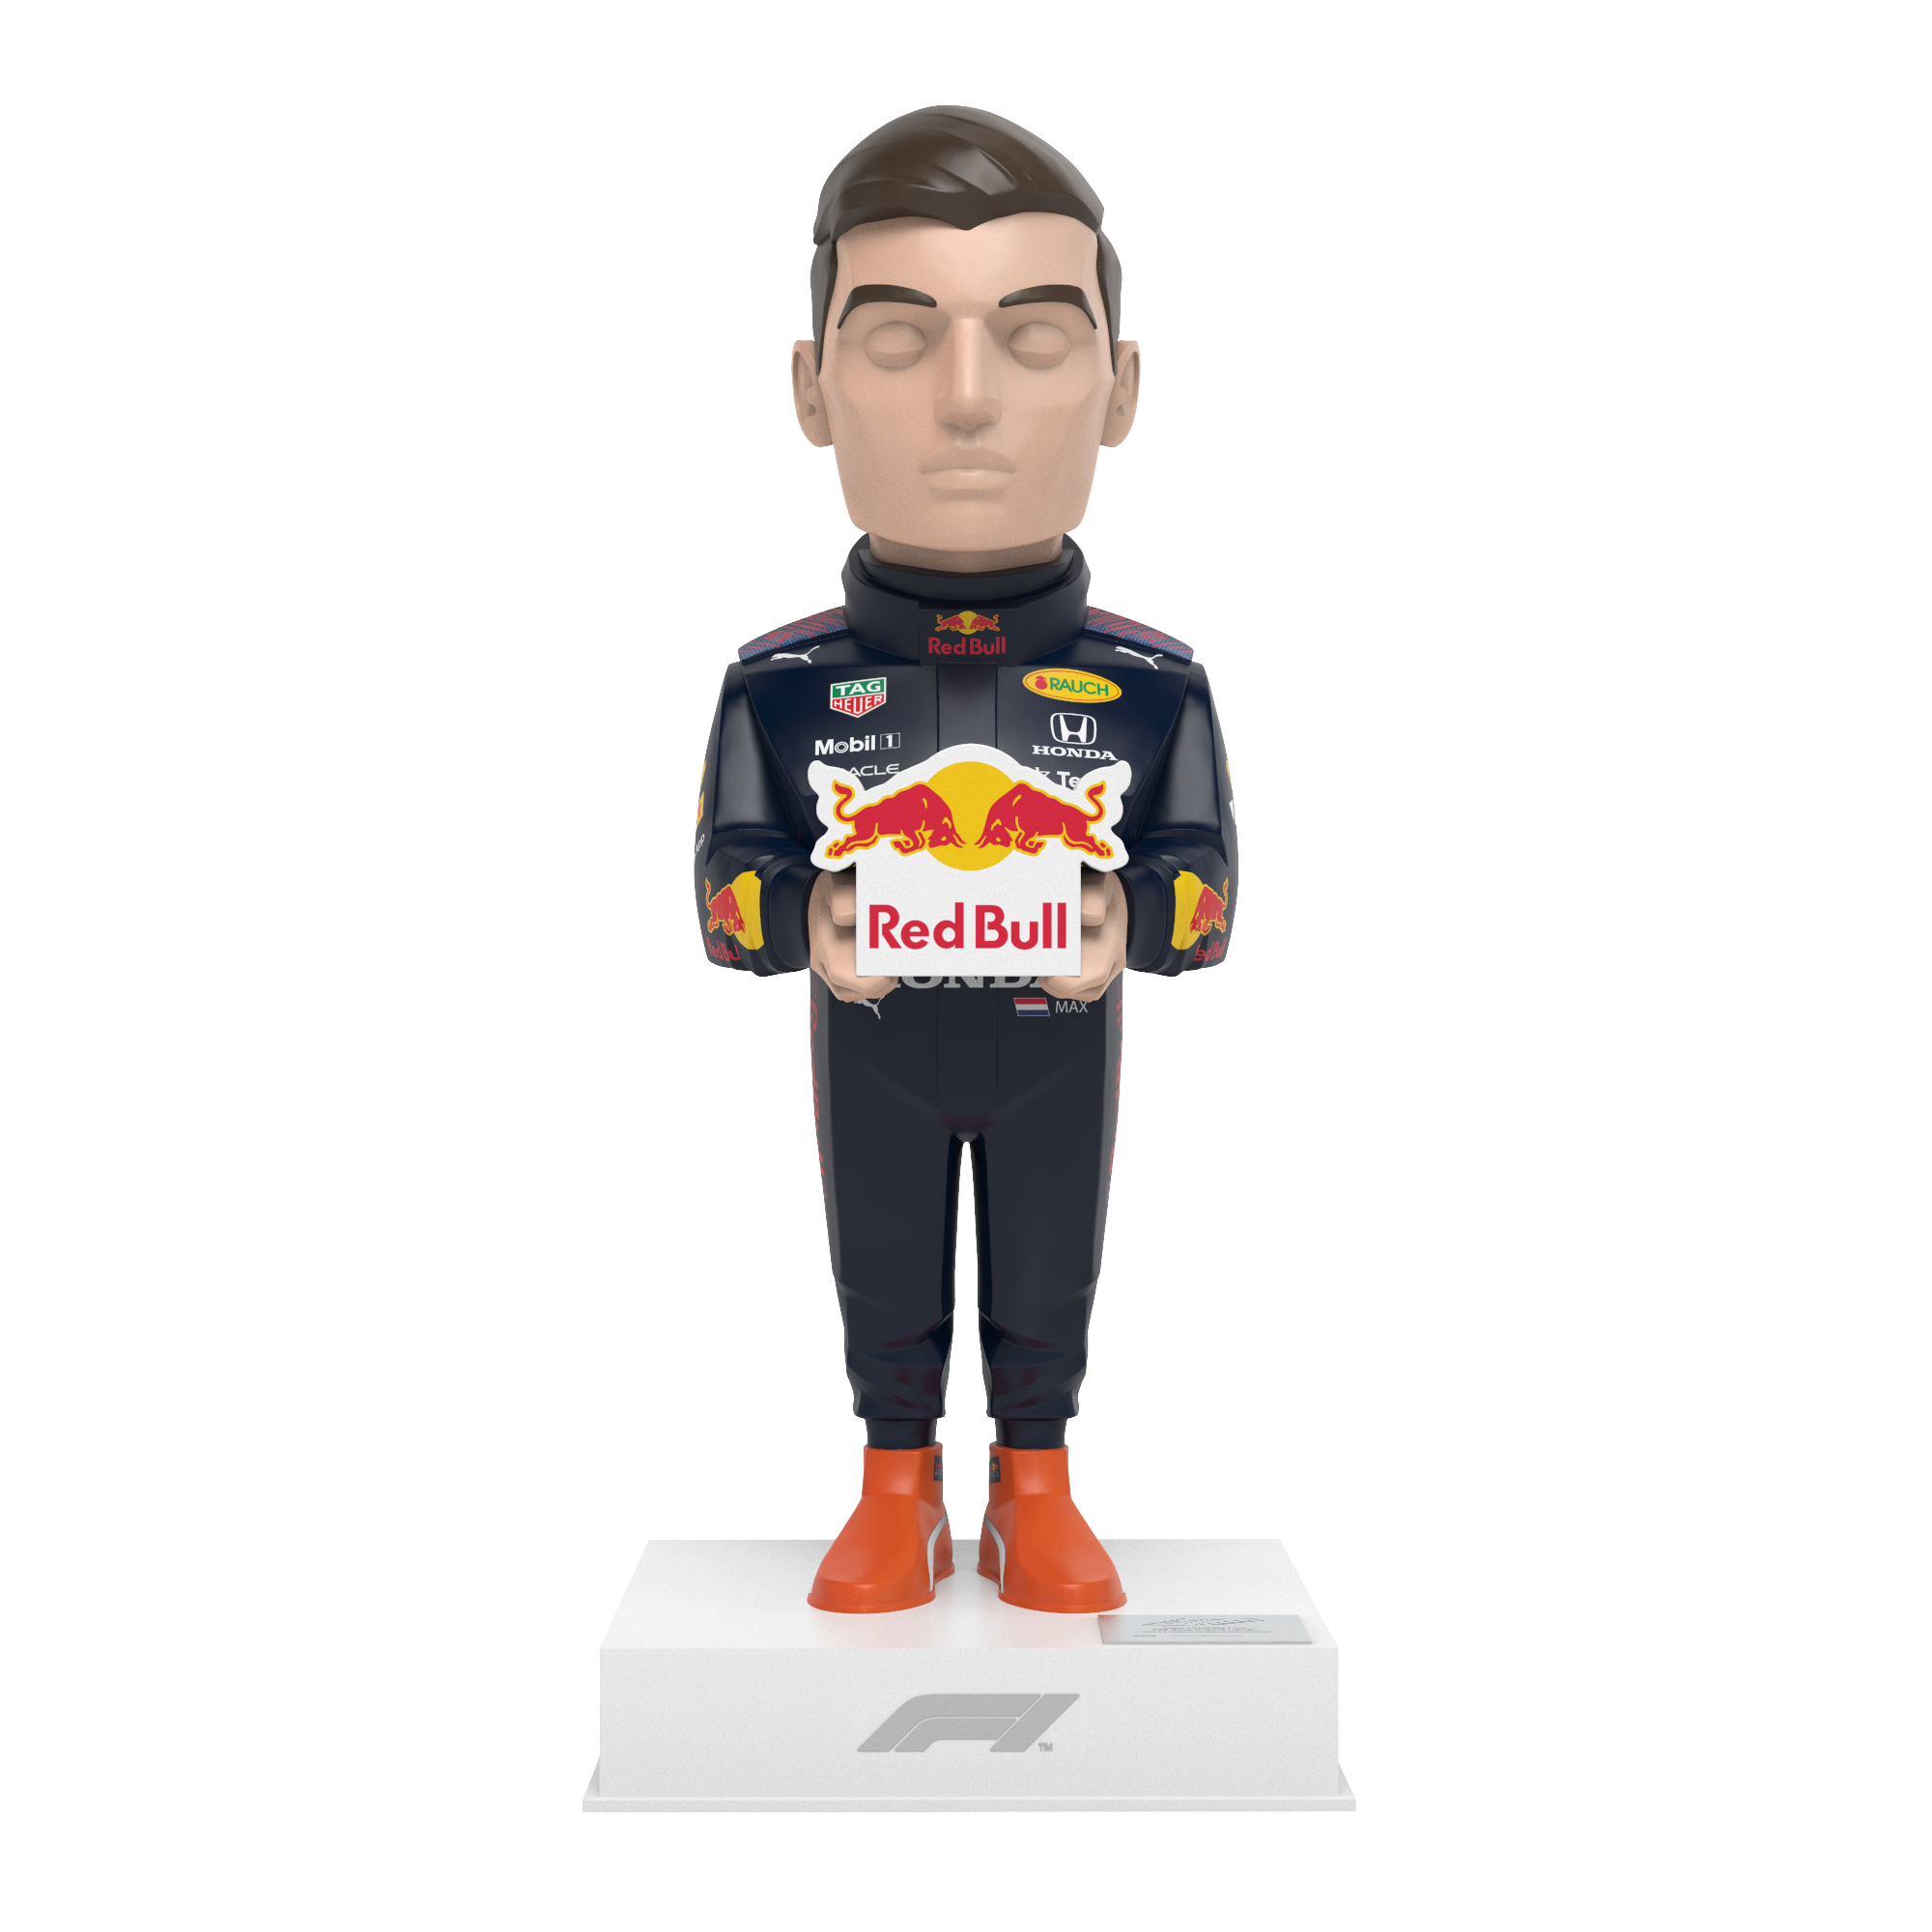 f1-2021-max-verstappen-life-size-edition